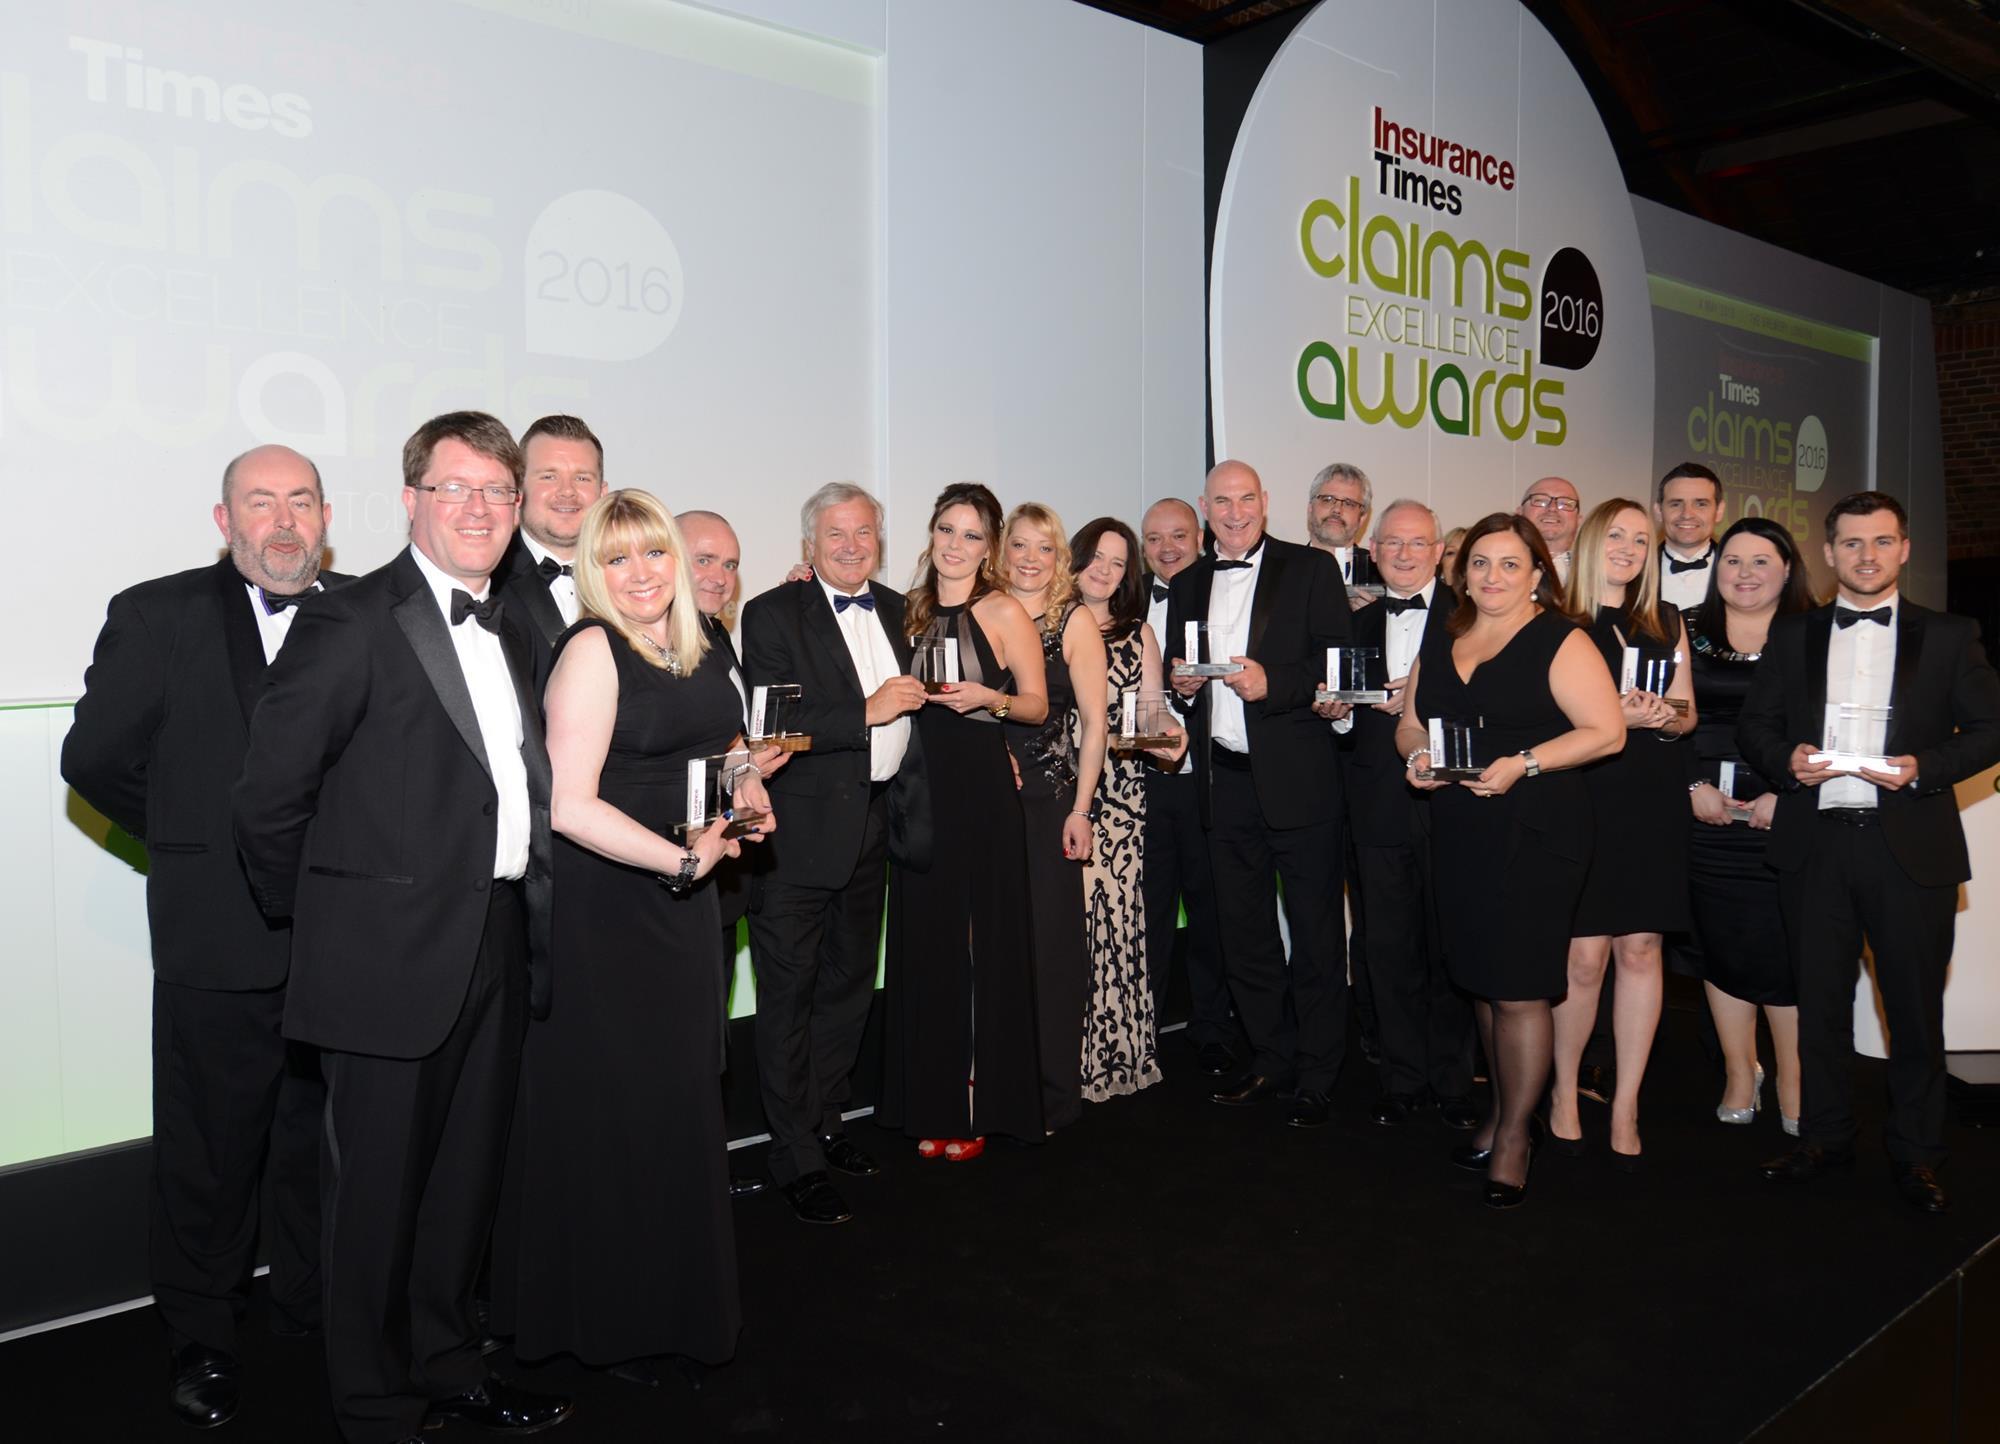 Claims Excellence Awards 2016: Winners revealed | Latest News | Insurance Times